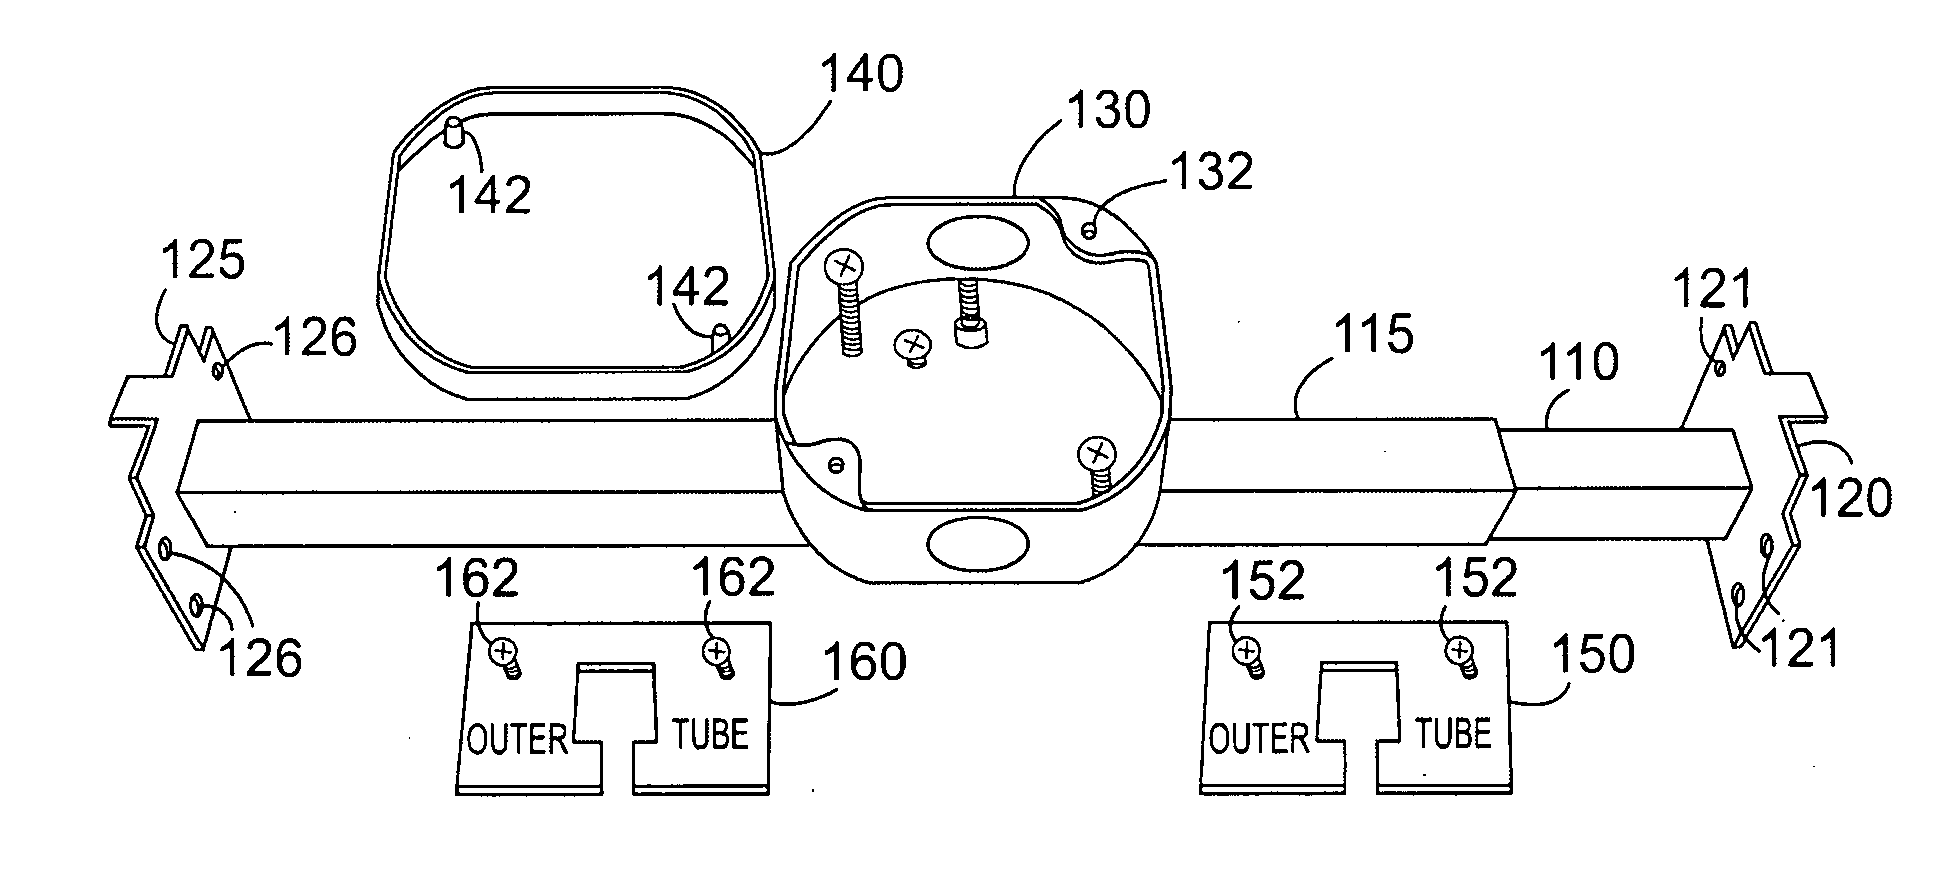 Fastening device for mounting an electrical fixture